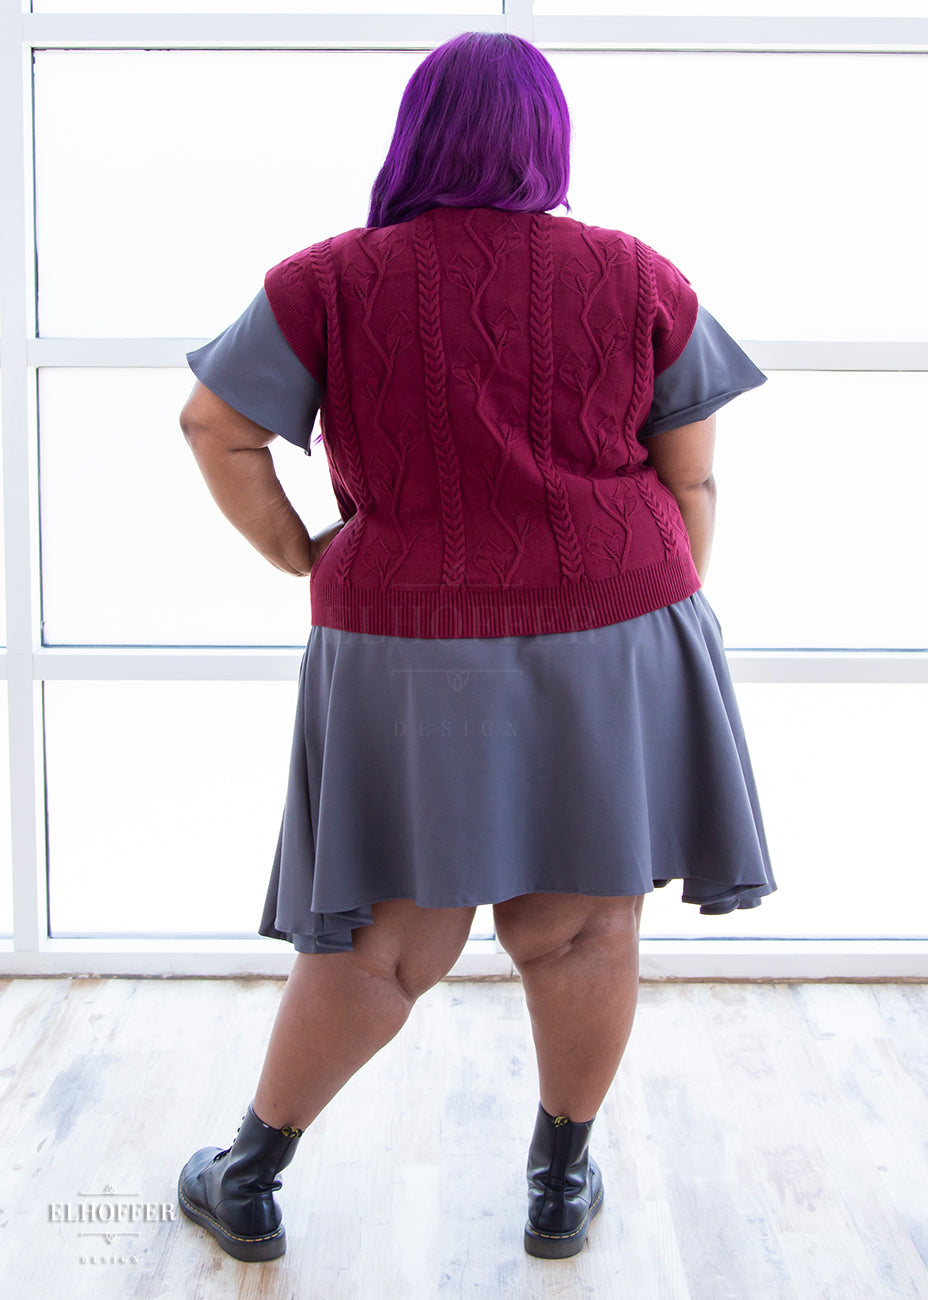 Jade is modeling the Sample L(3XL/-4XL). She has a 52” Chest, 41.” Waist, 54” Hips and is 5’4”.